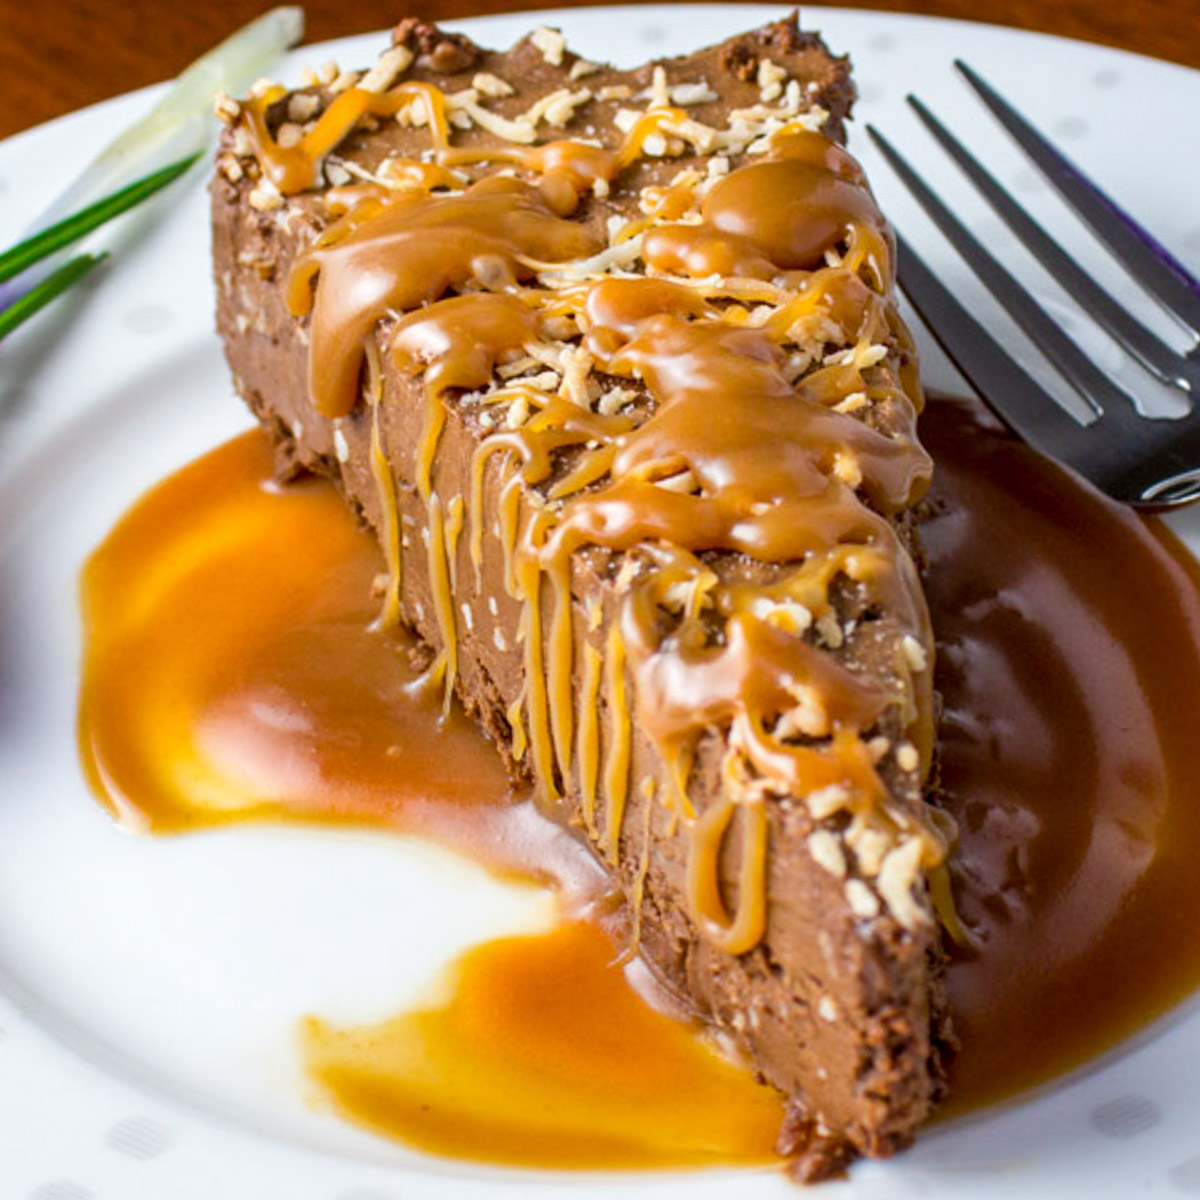 crustless chocolate mousse pie with warm caramel sauce on plate.